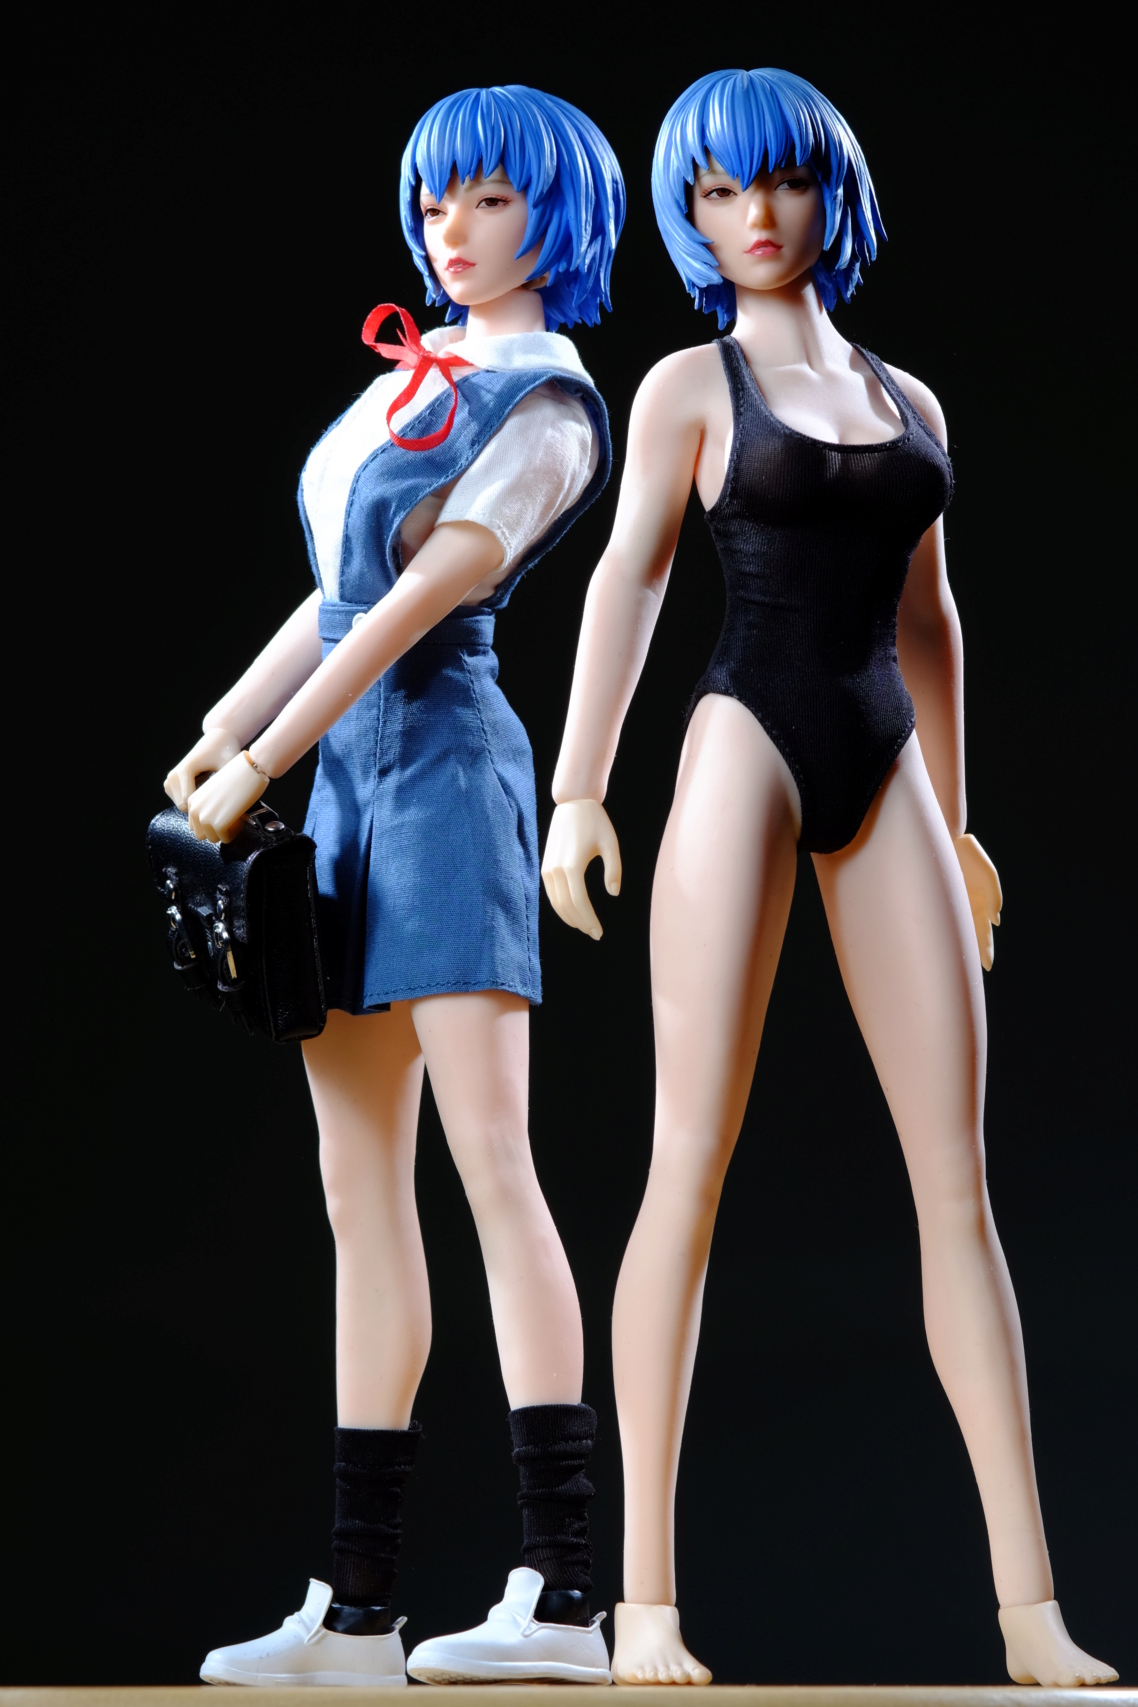 clothing - NEW PRODUCT: VSToys: 1/6 Ayanami Rei student outfit & head sculpt set Fuji0918